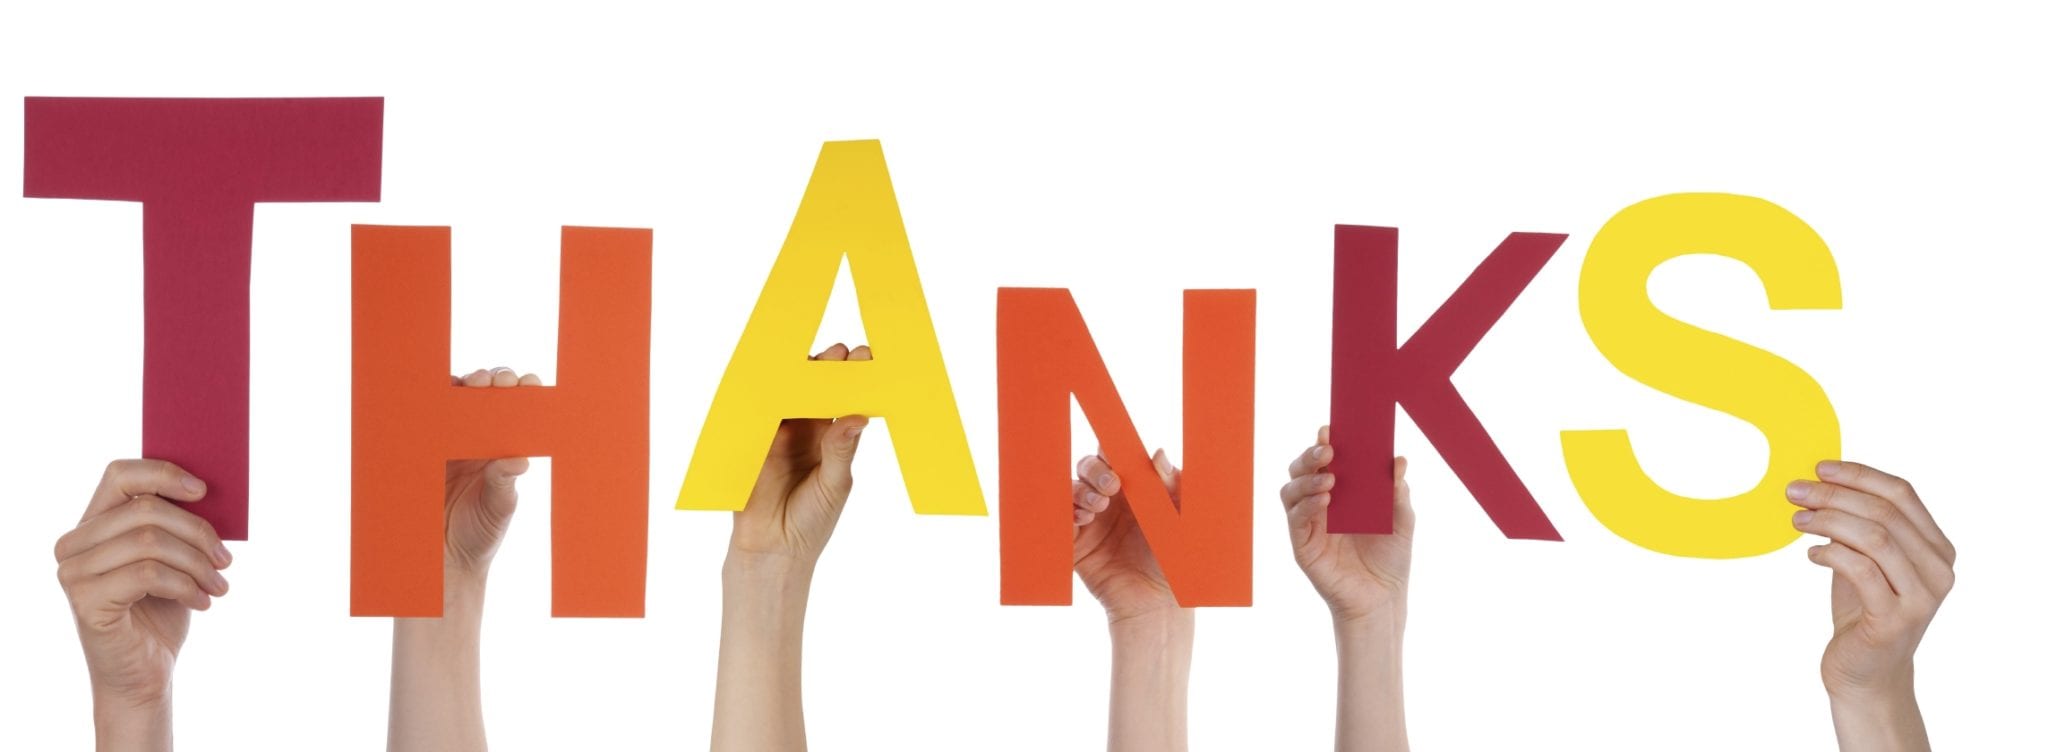 7 Things Small Business Owners Can Be Thankful For